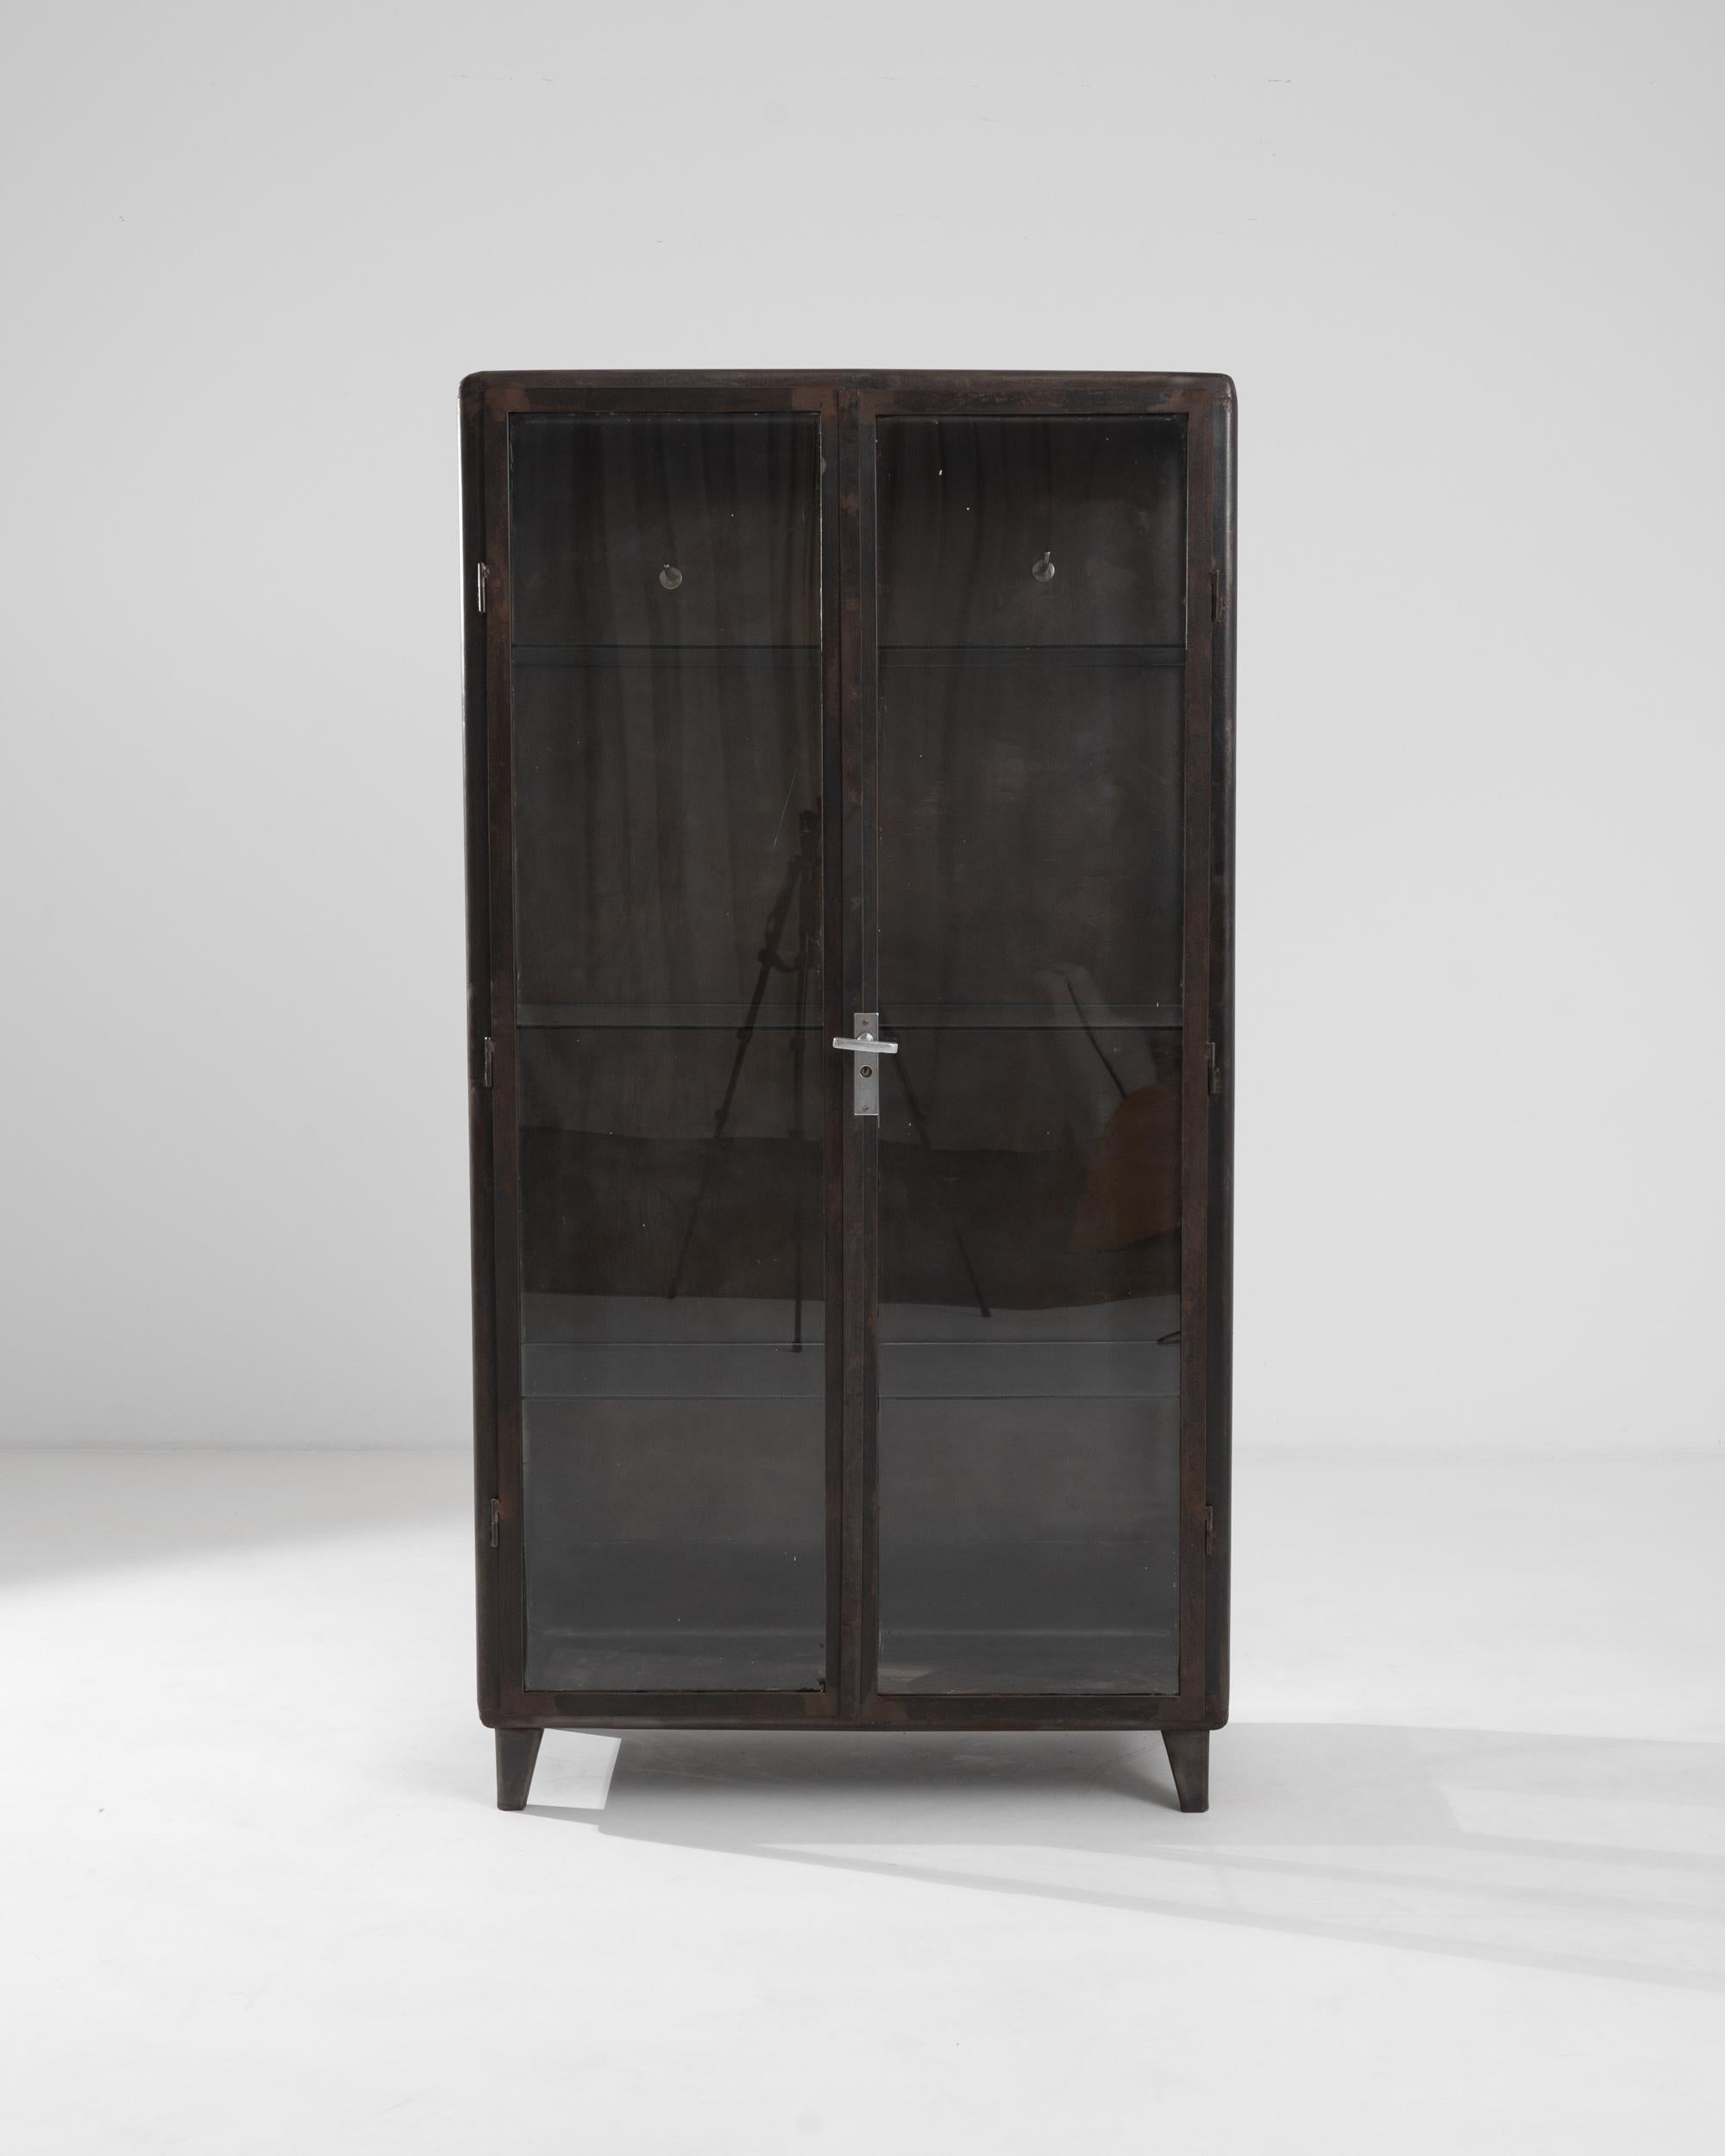 A metal display cabinet from 1950s Central Europe. Welded metal joinery, smoothed at the corners forms a utilitarian but eye-pleasing framing for this cabinet’s delicately composed glass shelves and drawers. Created with industrial mid-century